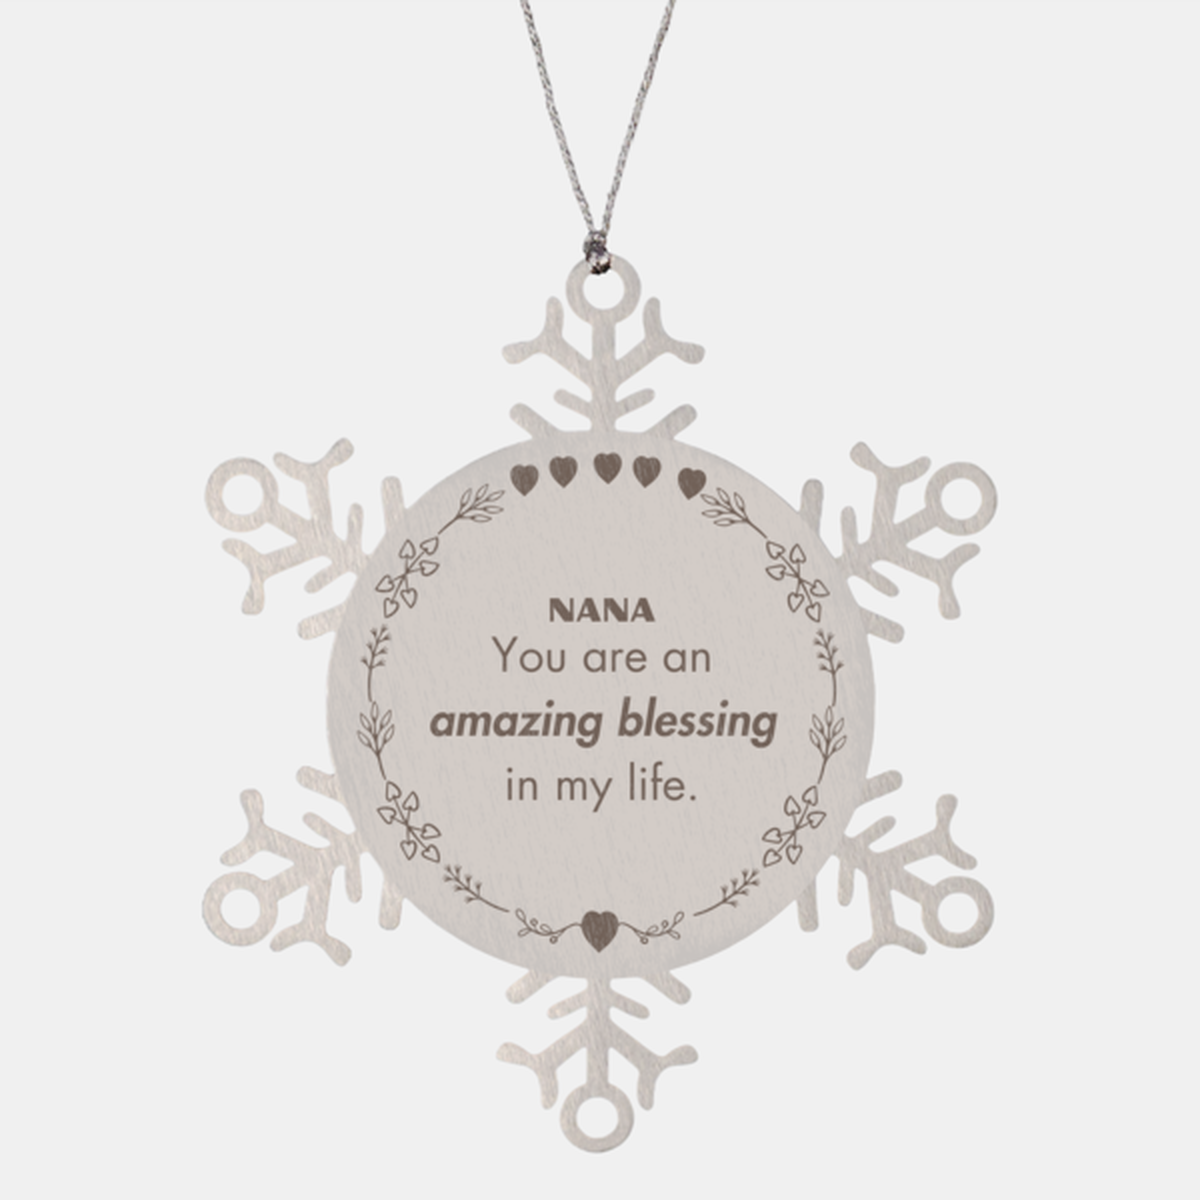 Nana Snowflake Ornament, You are an amazing blessing in my life, Thank You Gifts For Nana, Inspirational Birthday Christmas Unique Gifts For Nana